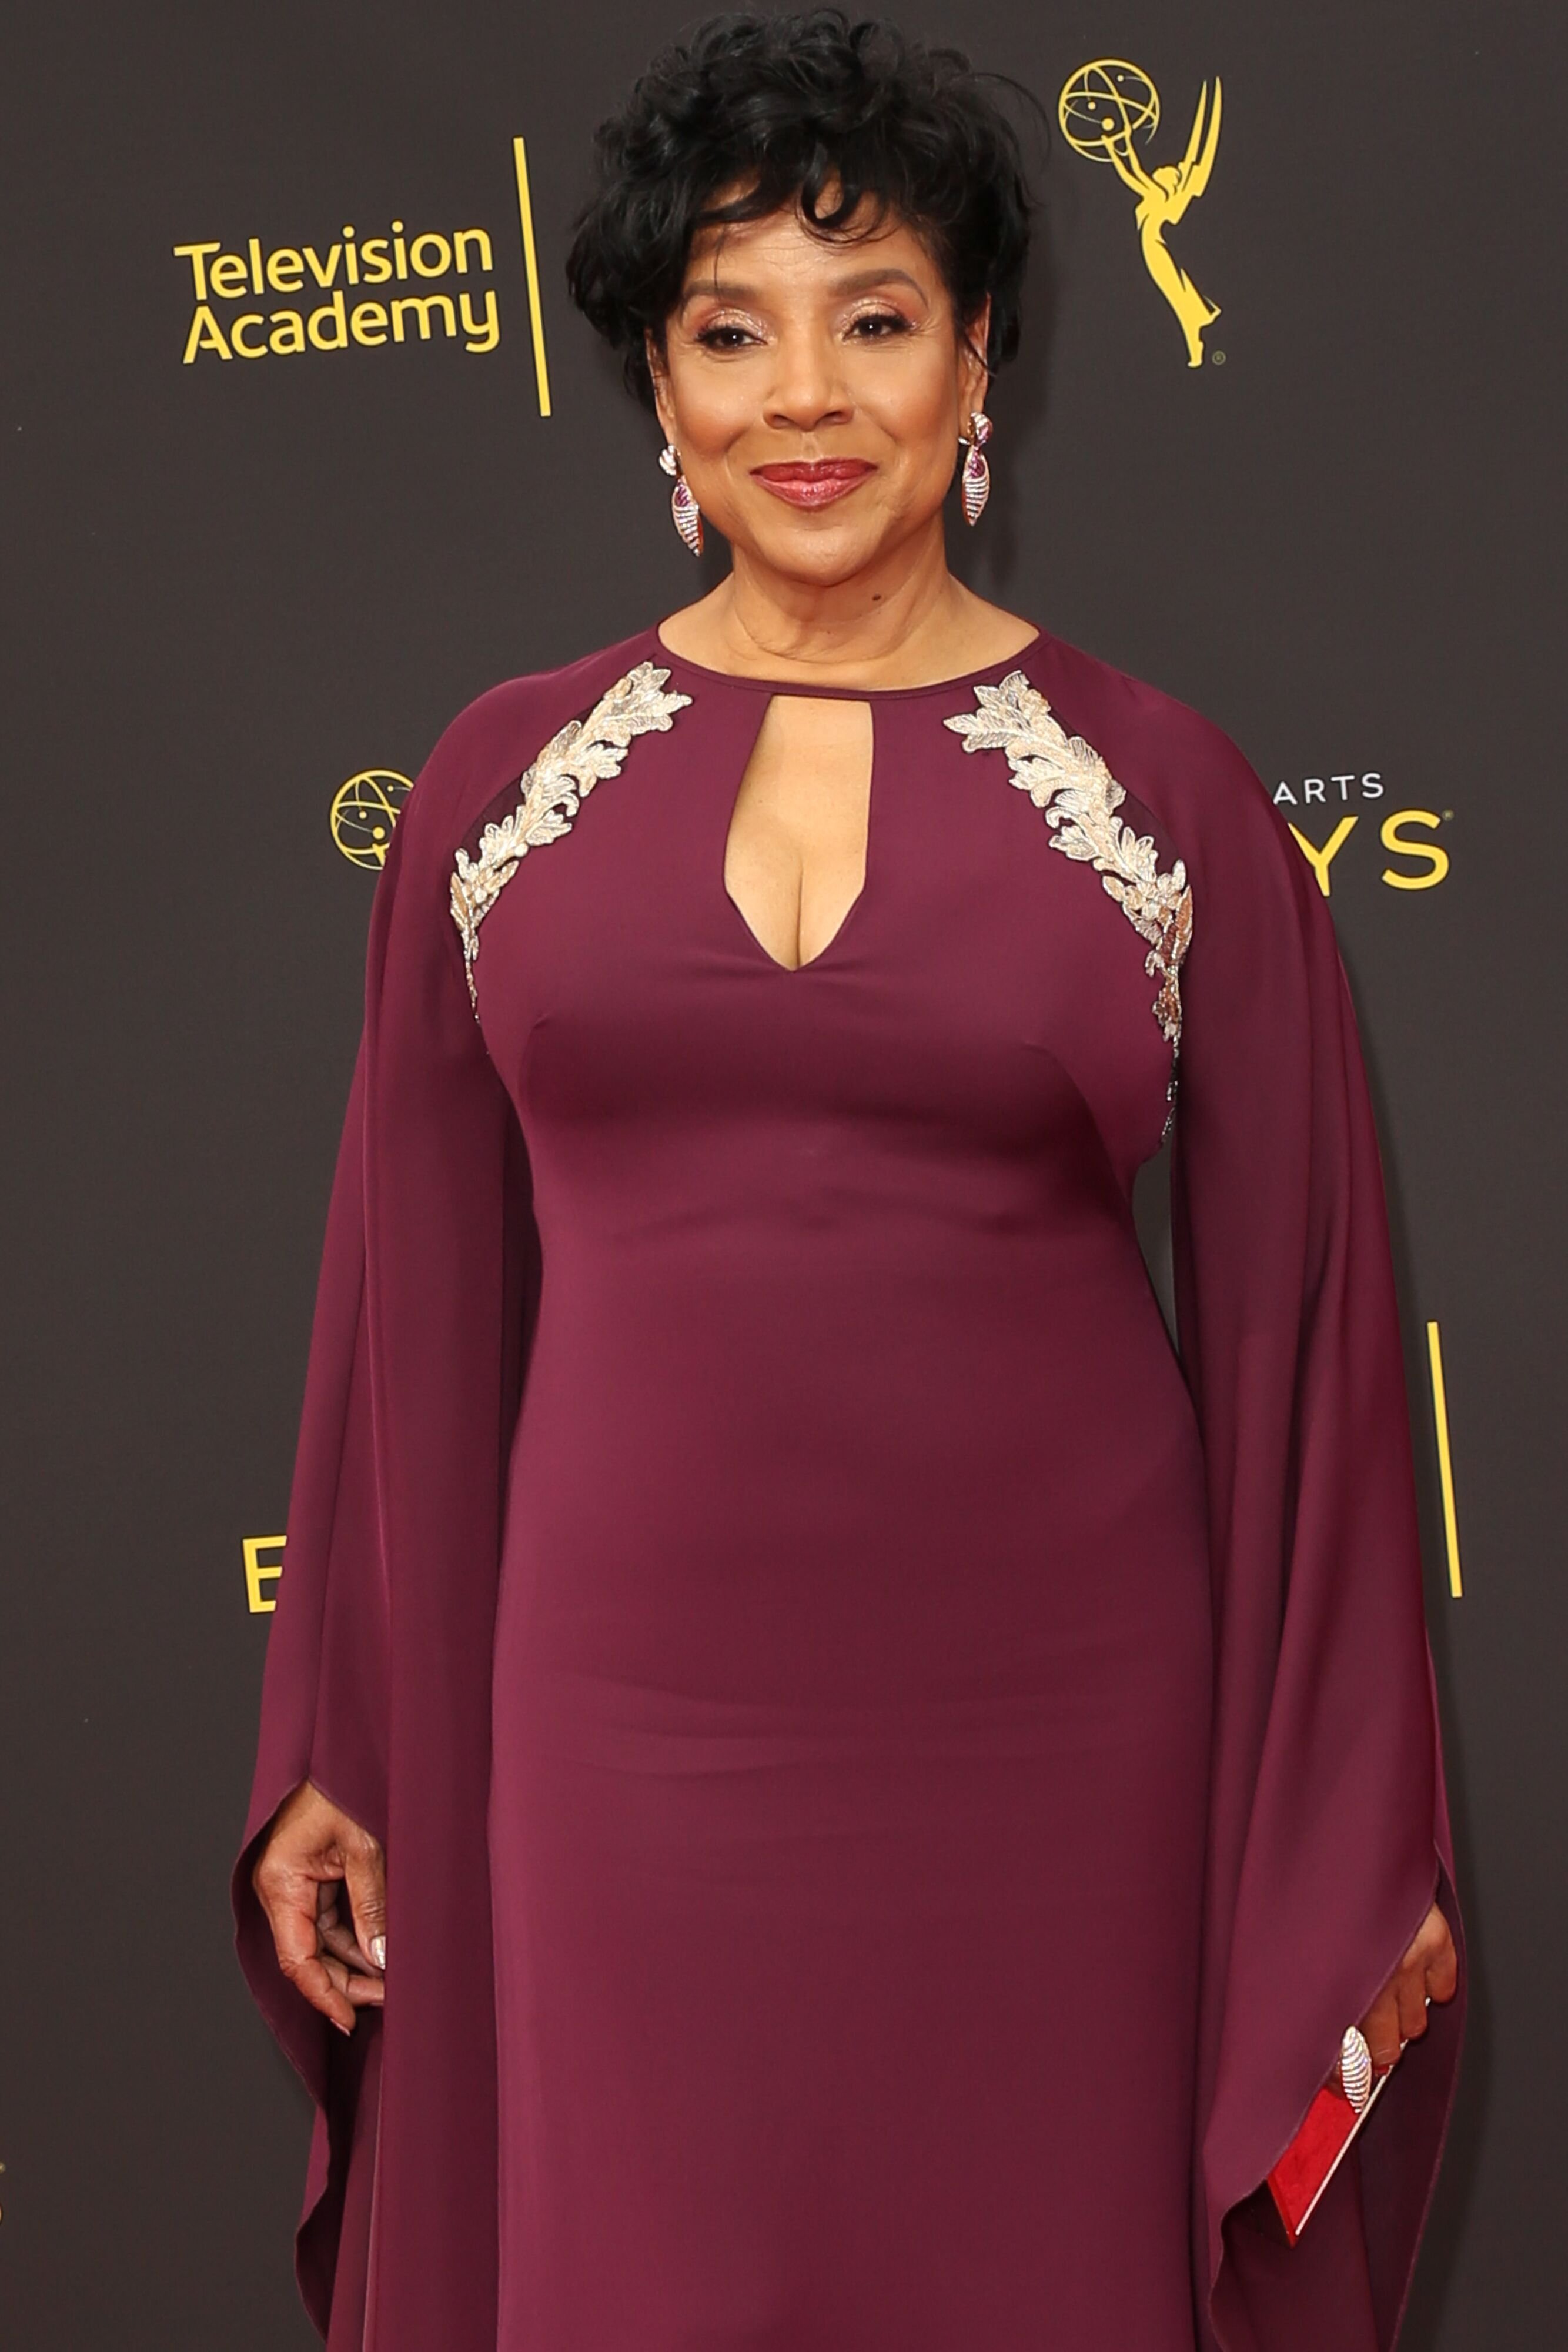 Phylicia Rashad at the 2019 Creative Arts Emmy Awards in Los Angeles/ Source: Getty Images